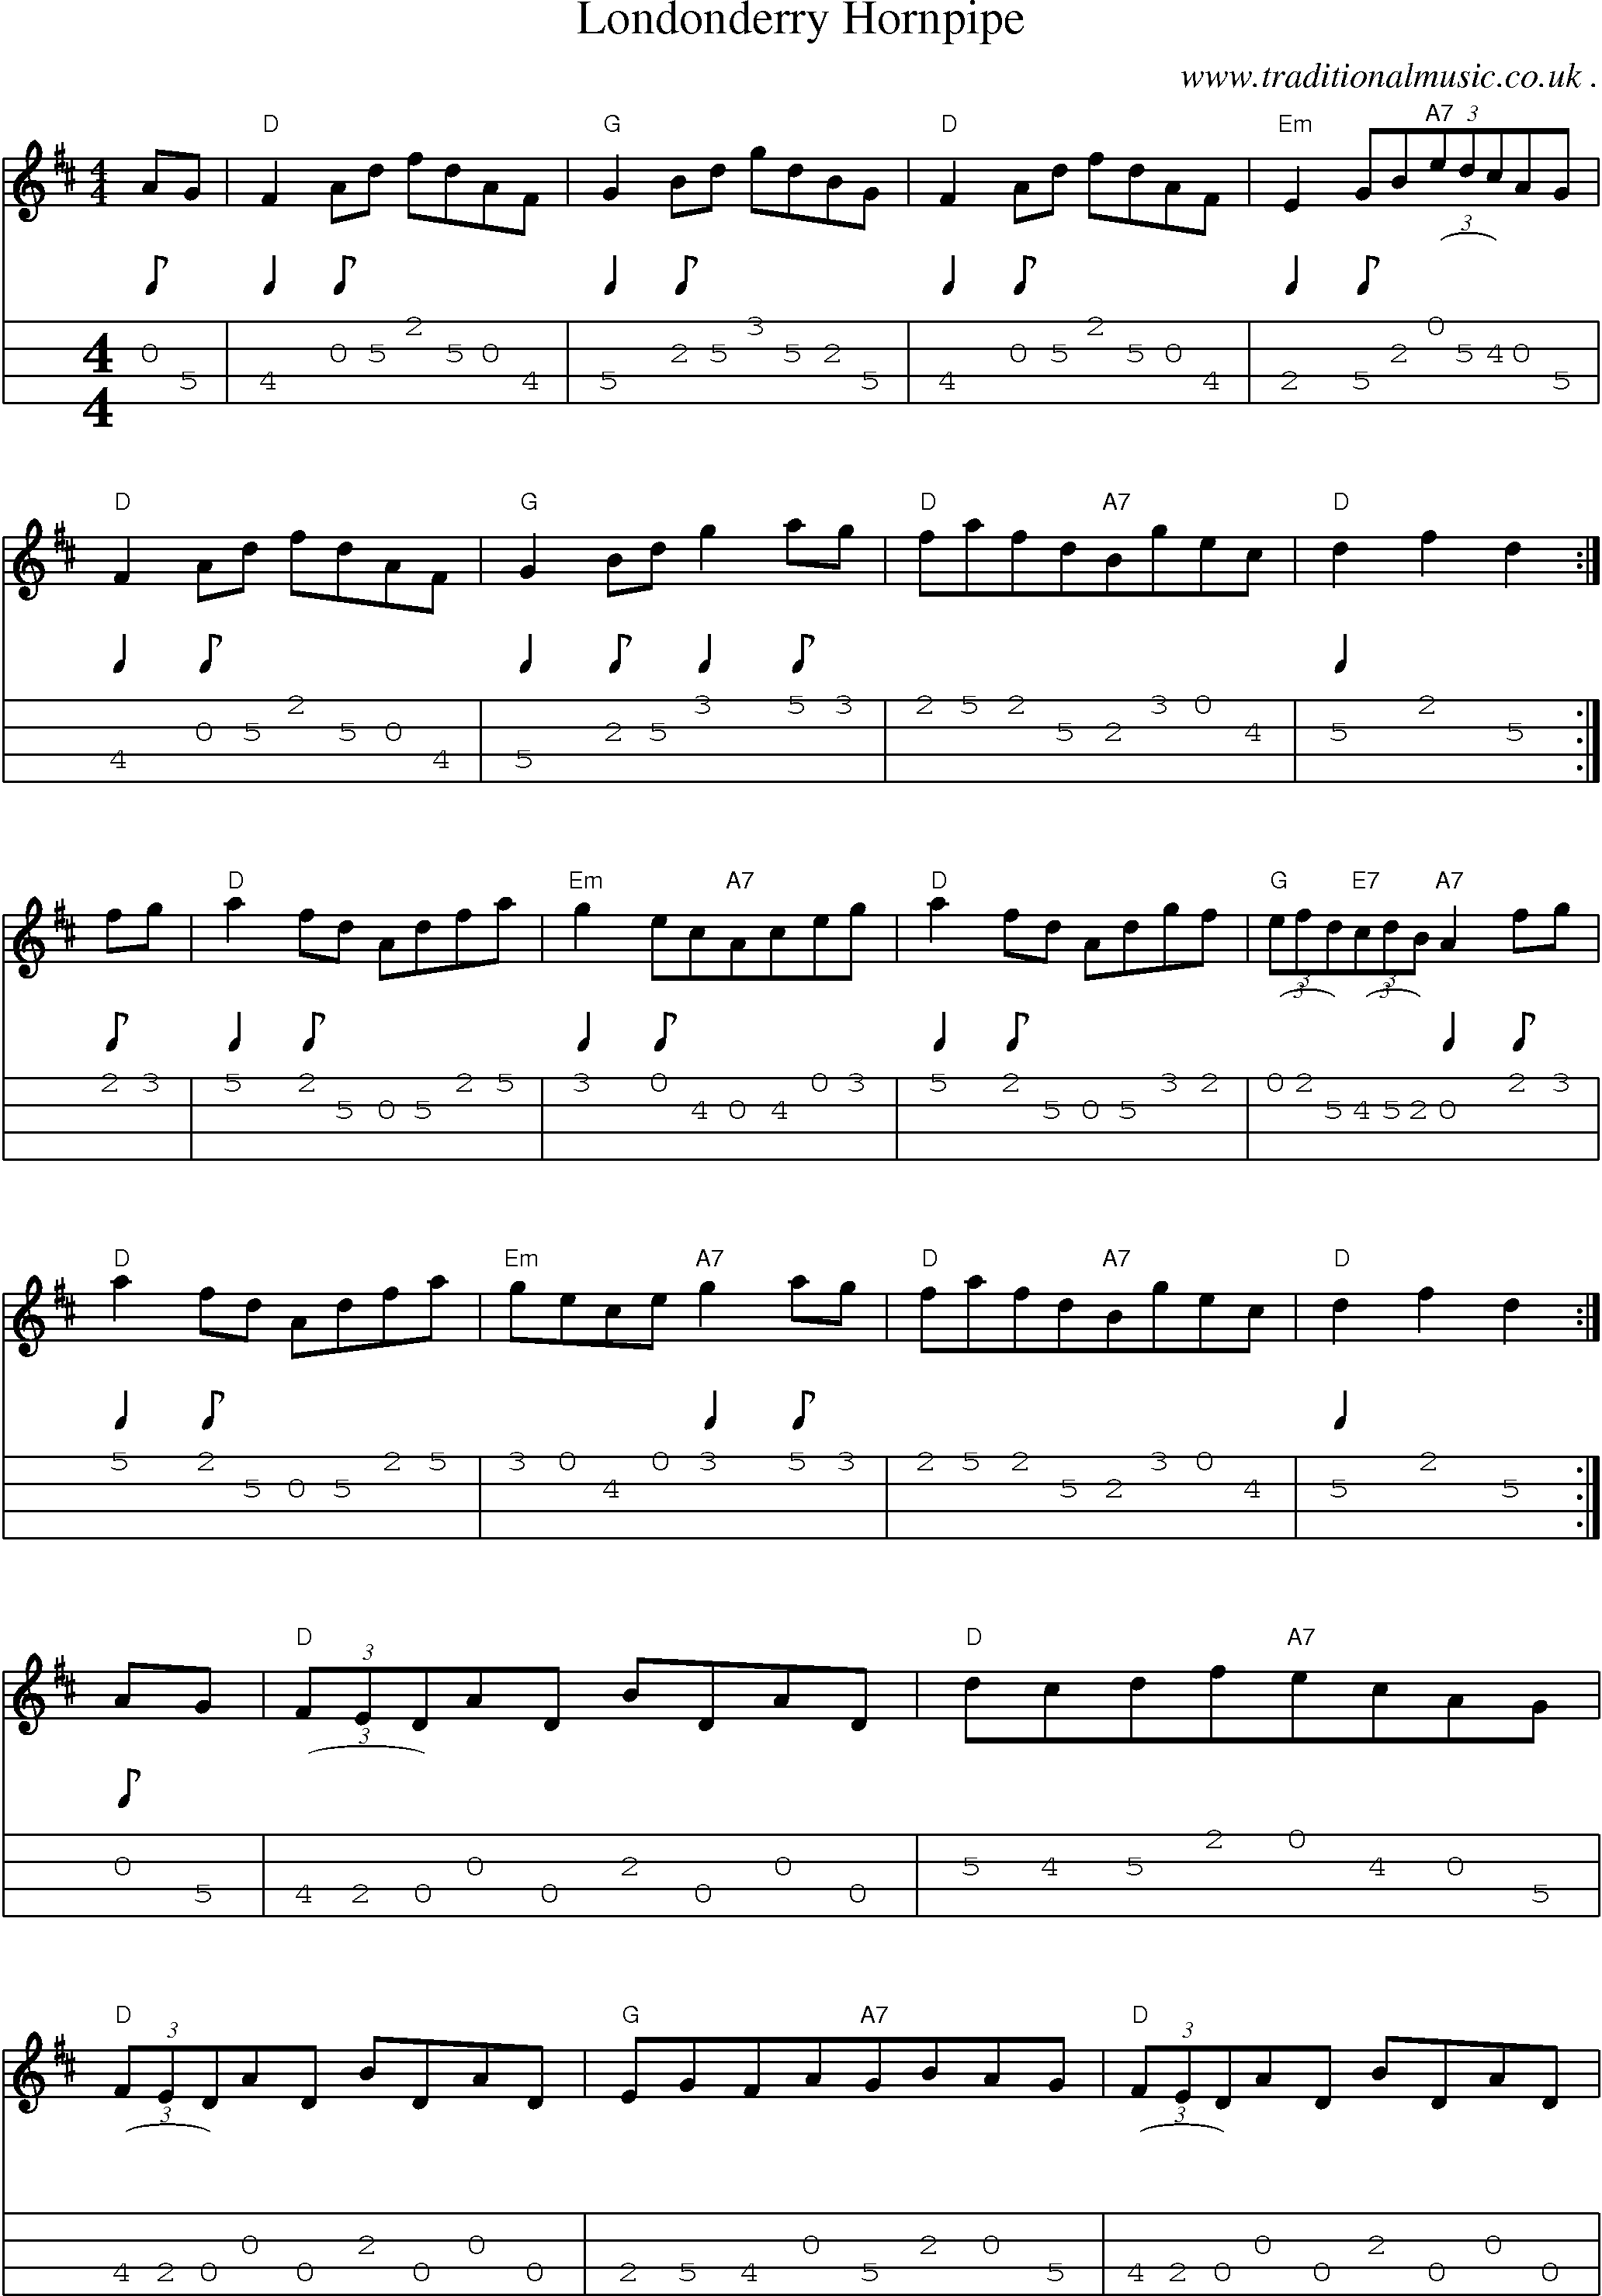 Sheet-Music and Mandolin Tabs for Londonderry Hornpipe